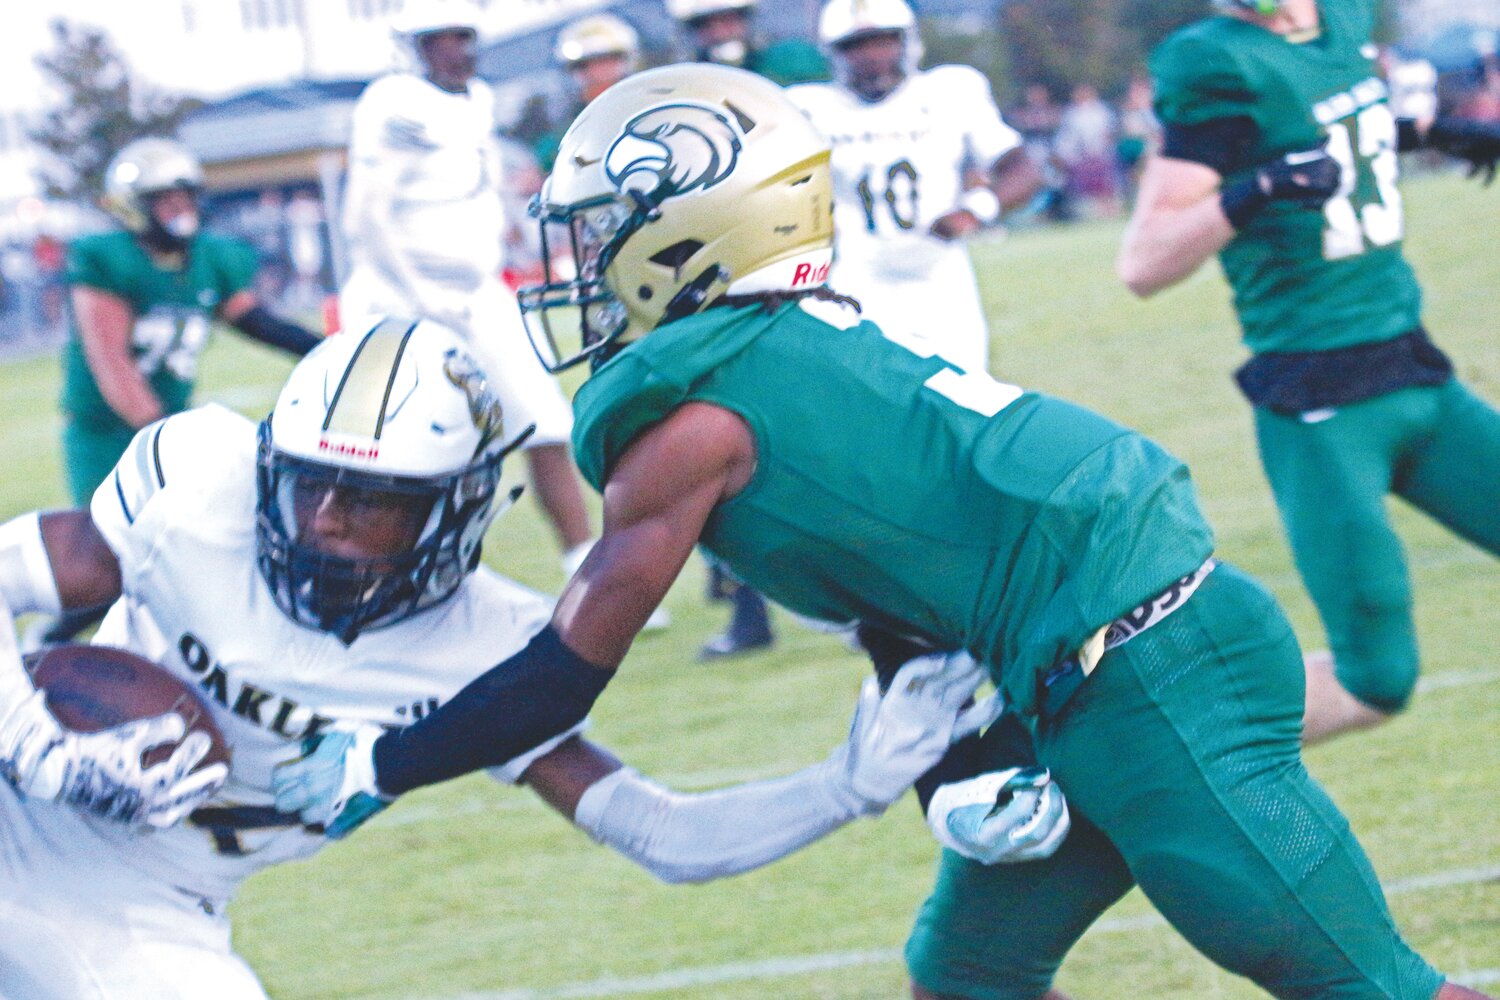 Oakeaf High defensive back Jordin Pryce, in white, steals end zone pass attempt to Fleming Island wide receiver Trace Burney in first-half action of Knights’ 24-14 district win Friday night.